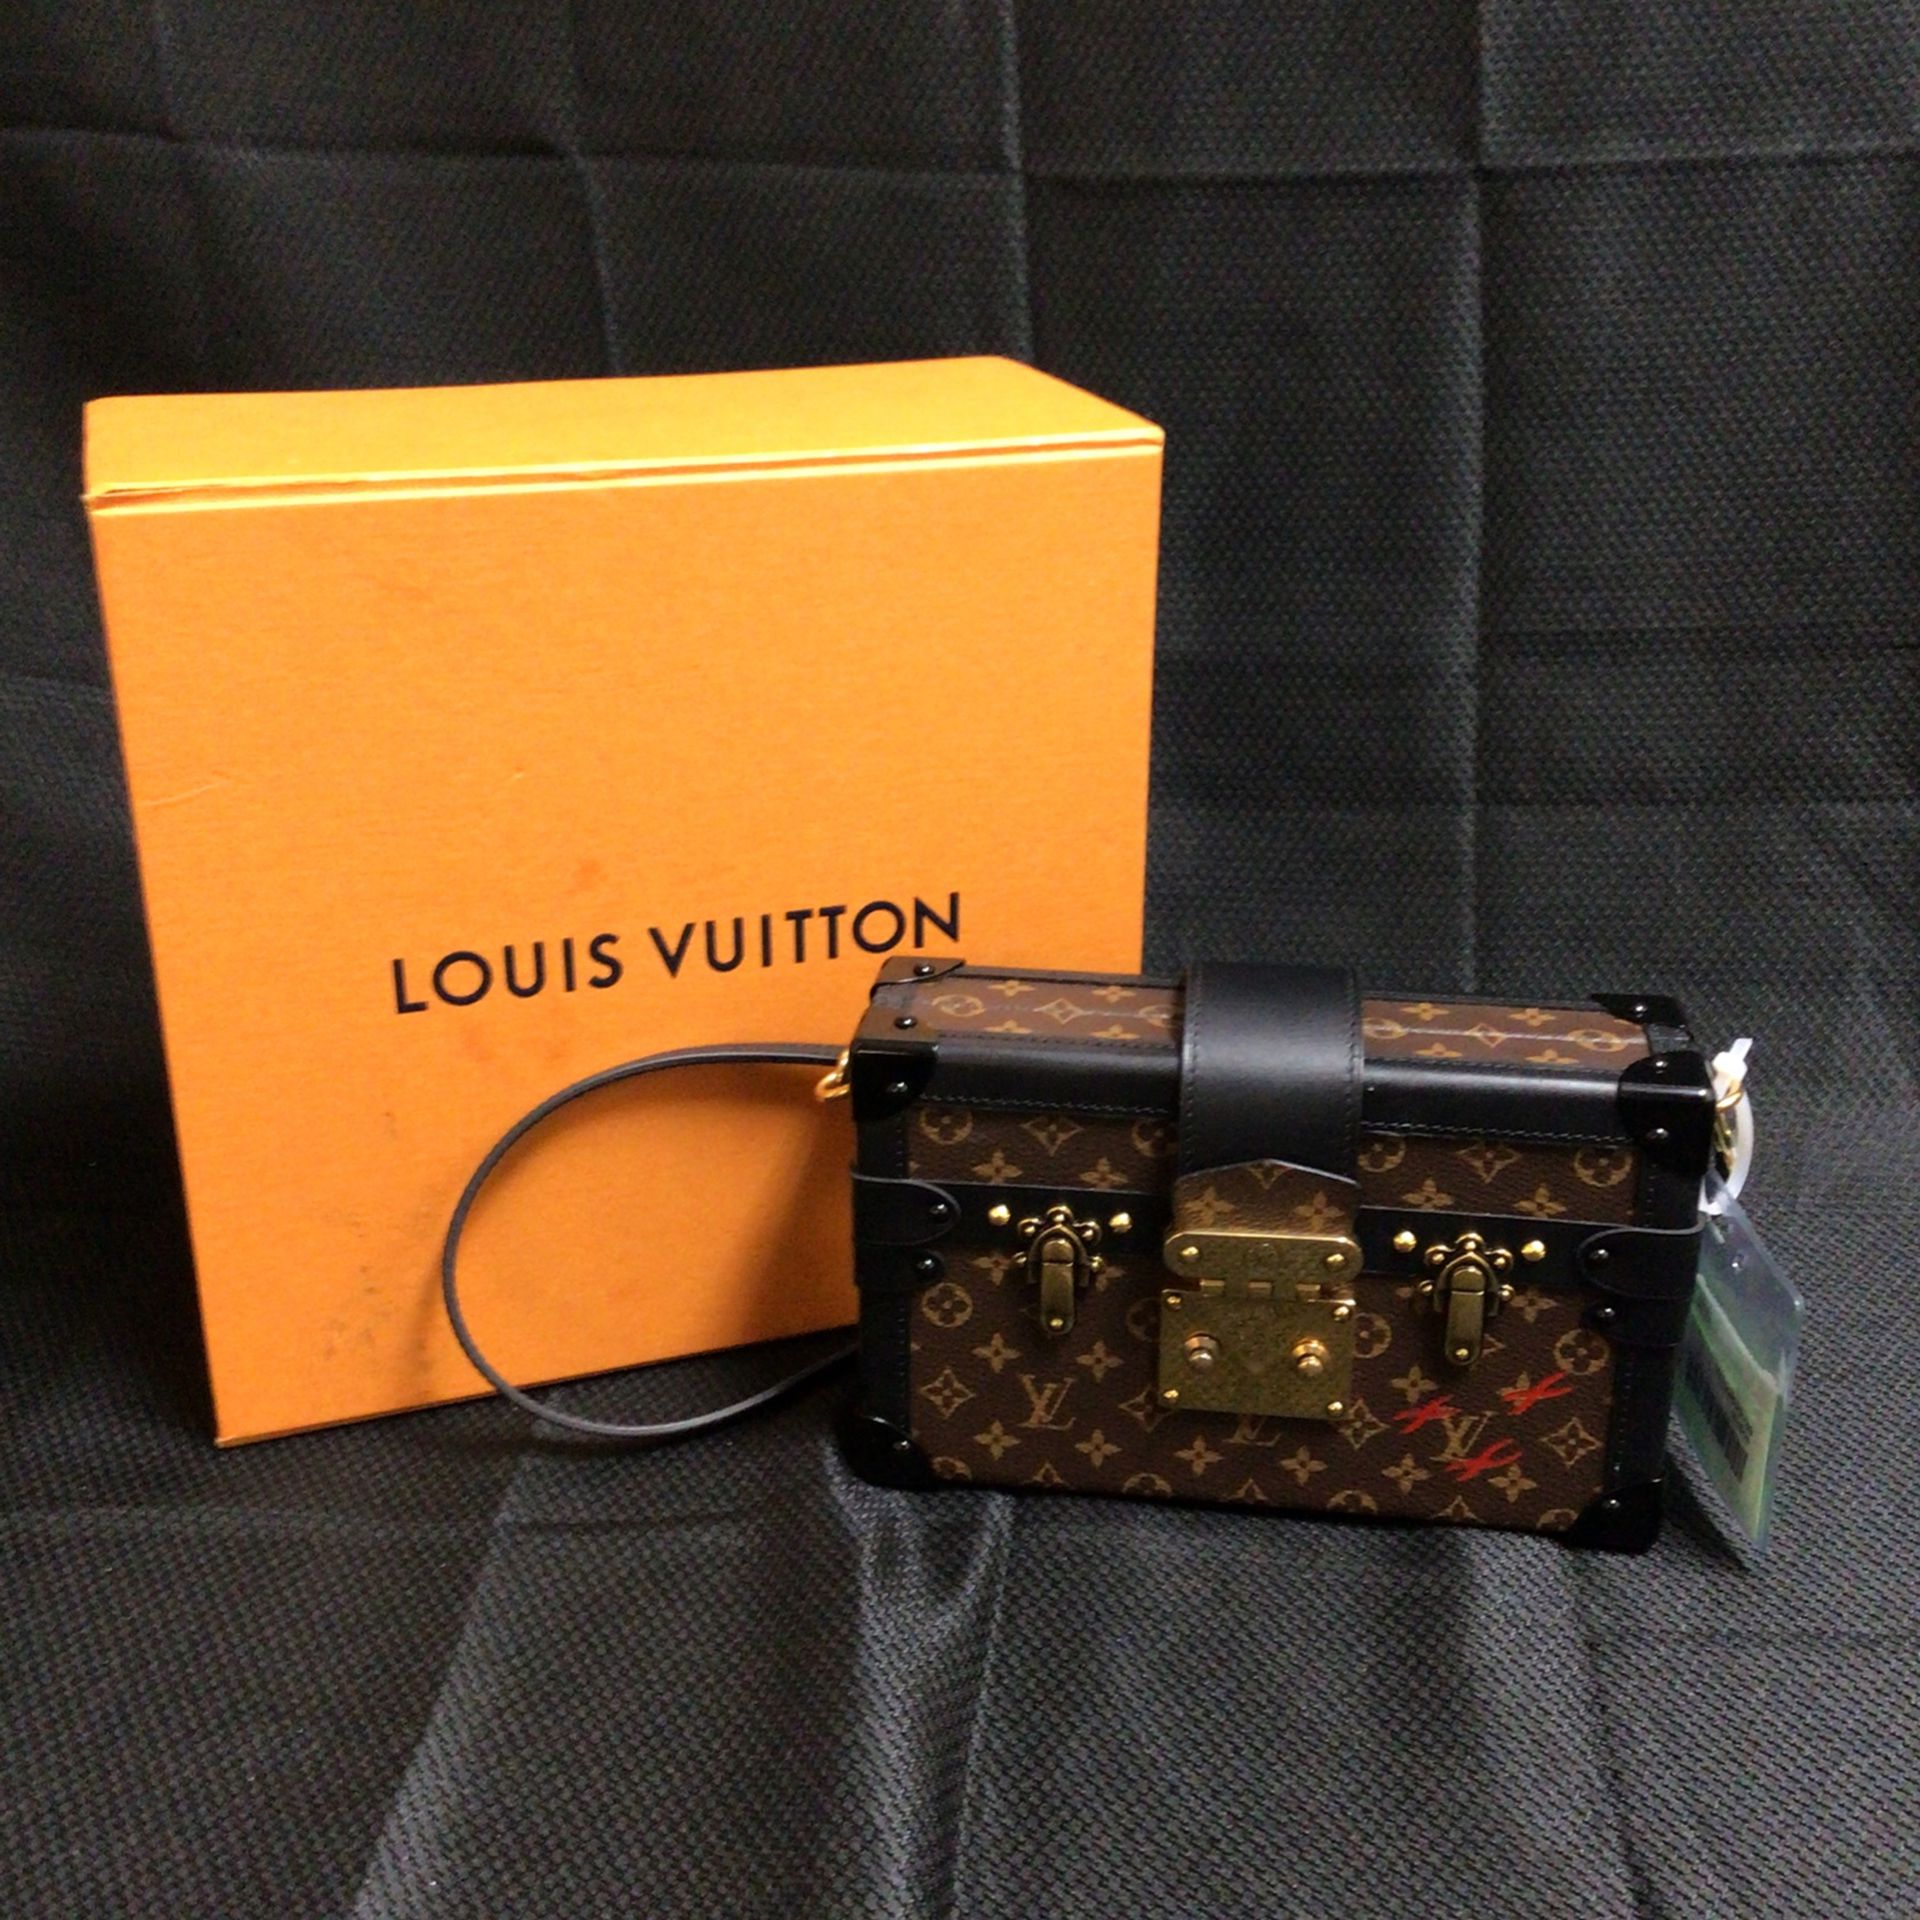 Louis Vuitton Petite Malle Monogram In Box With Dust Bag And Extra Strap